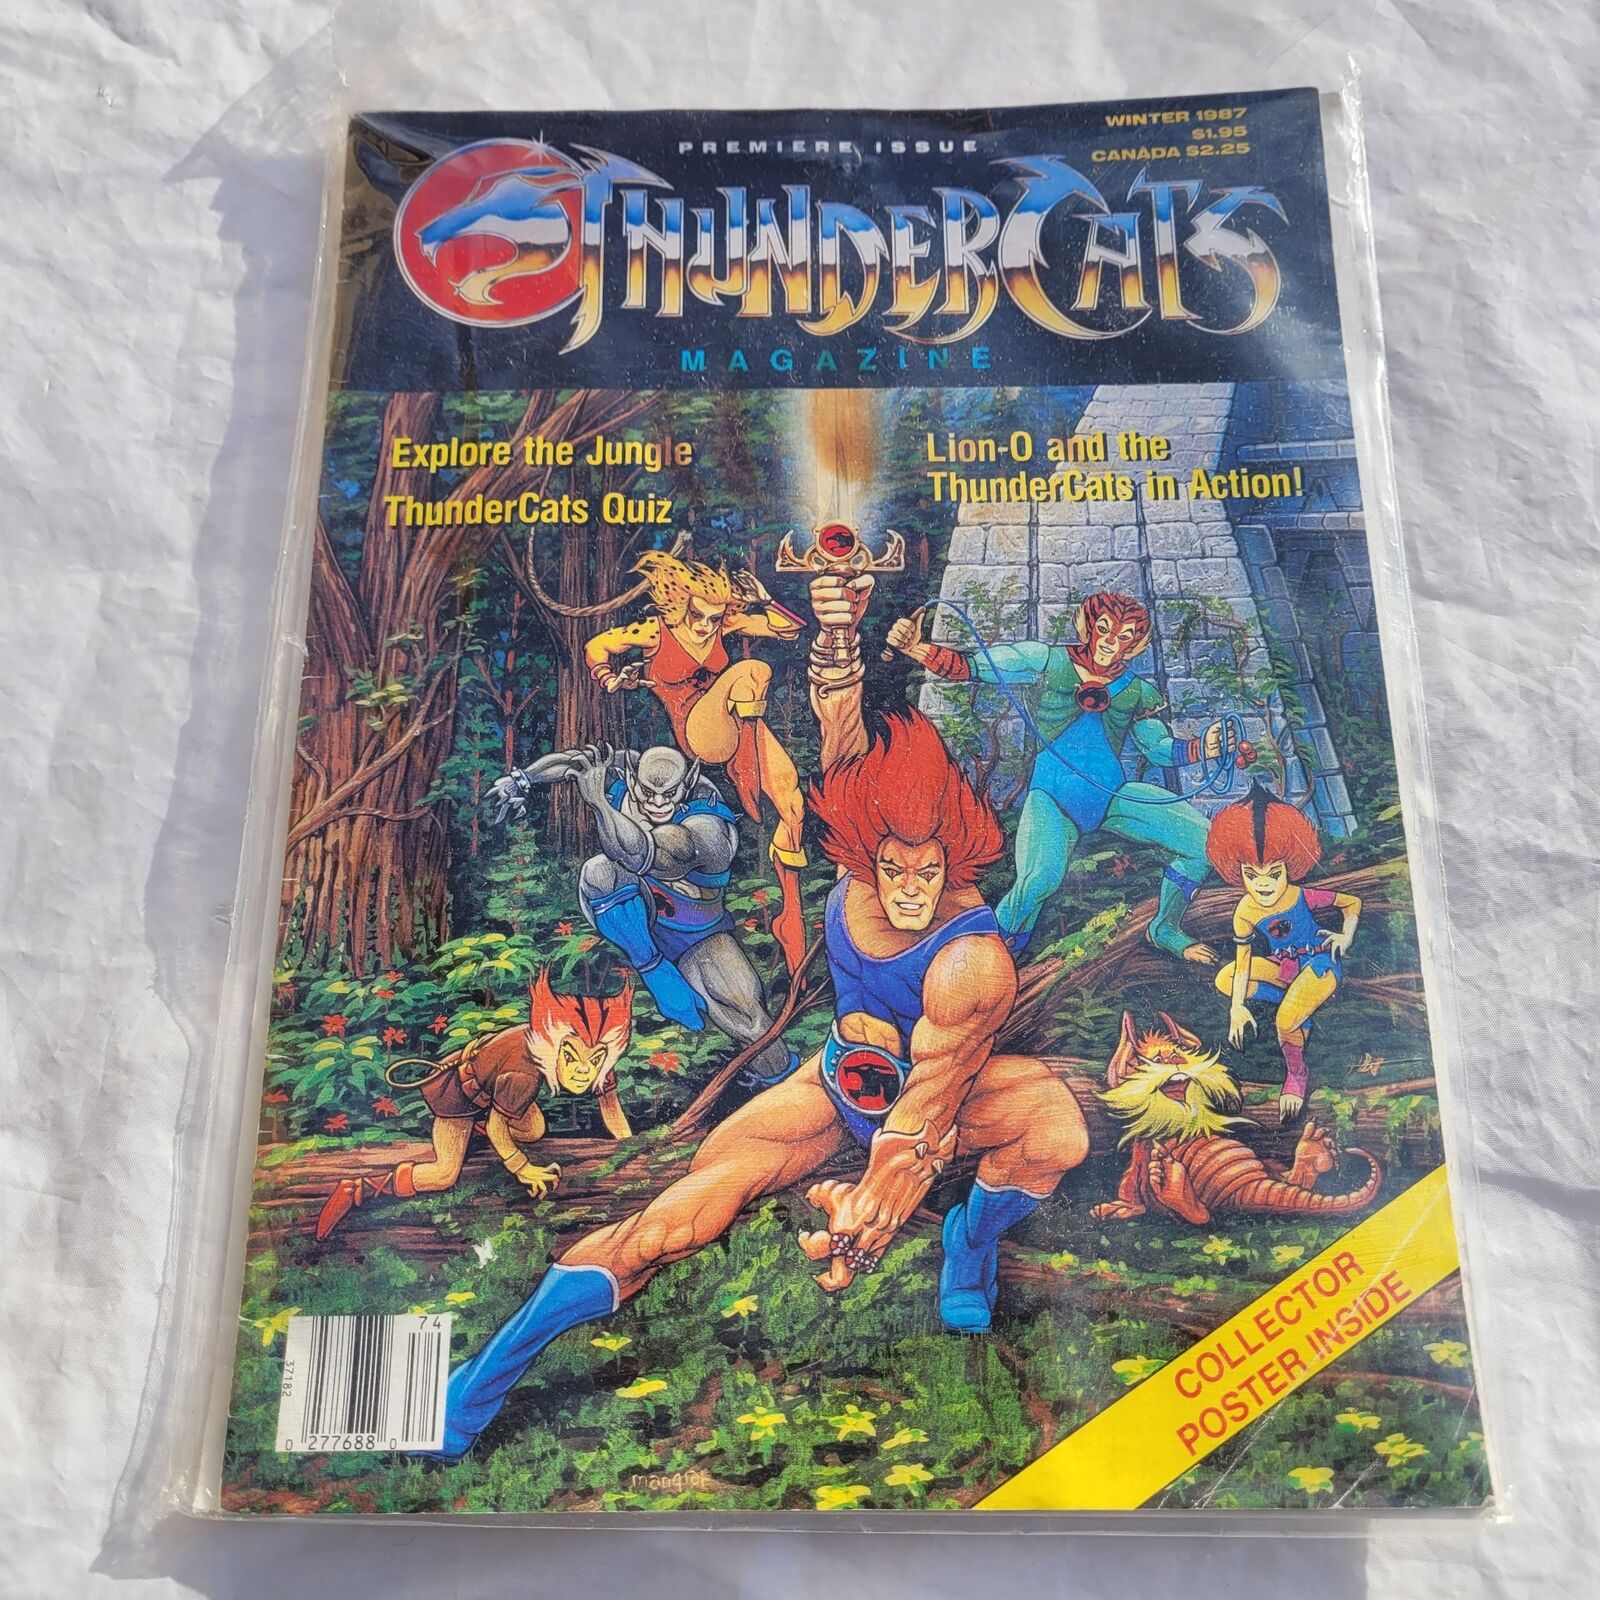 Thundercats Magazine Number 1 Premiere Issue Poster Intact Winter 1987